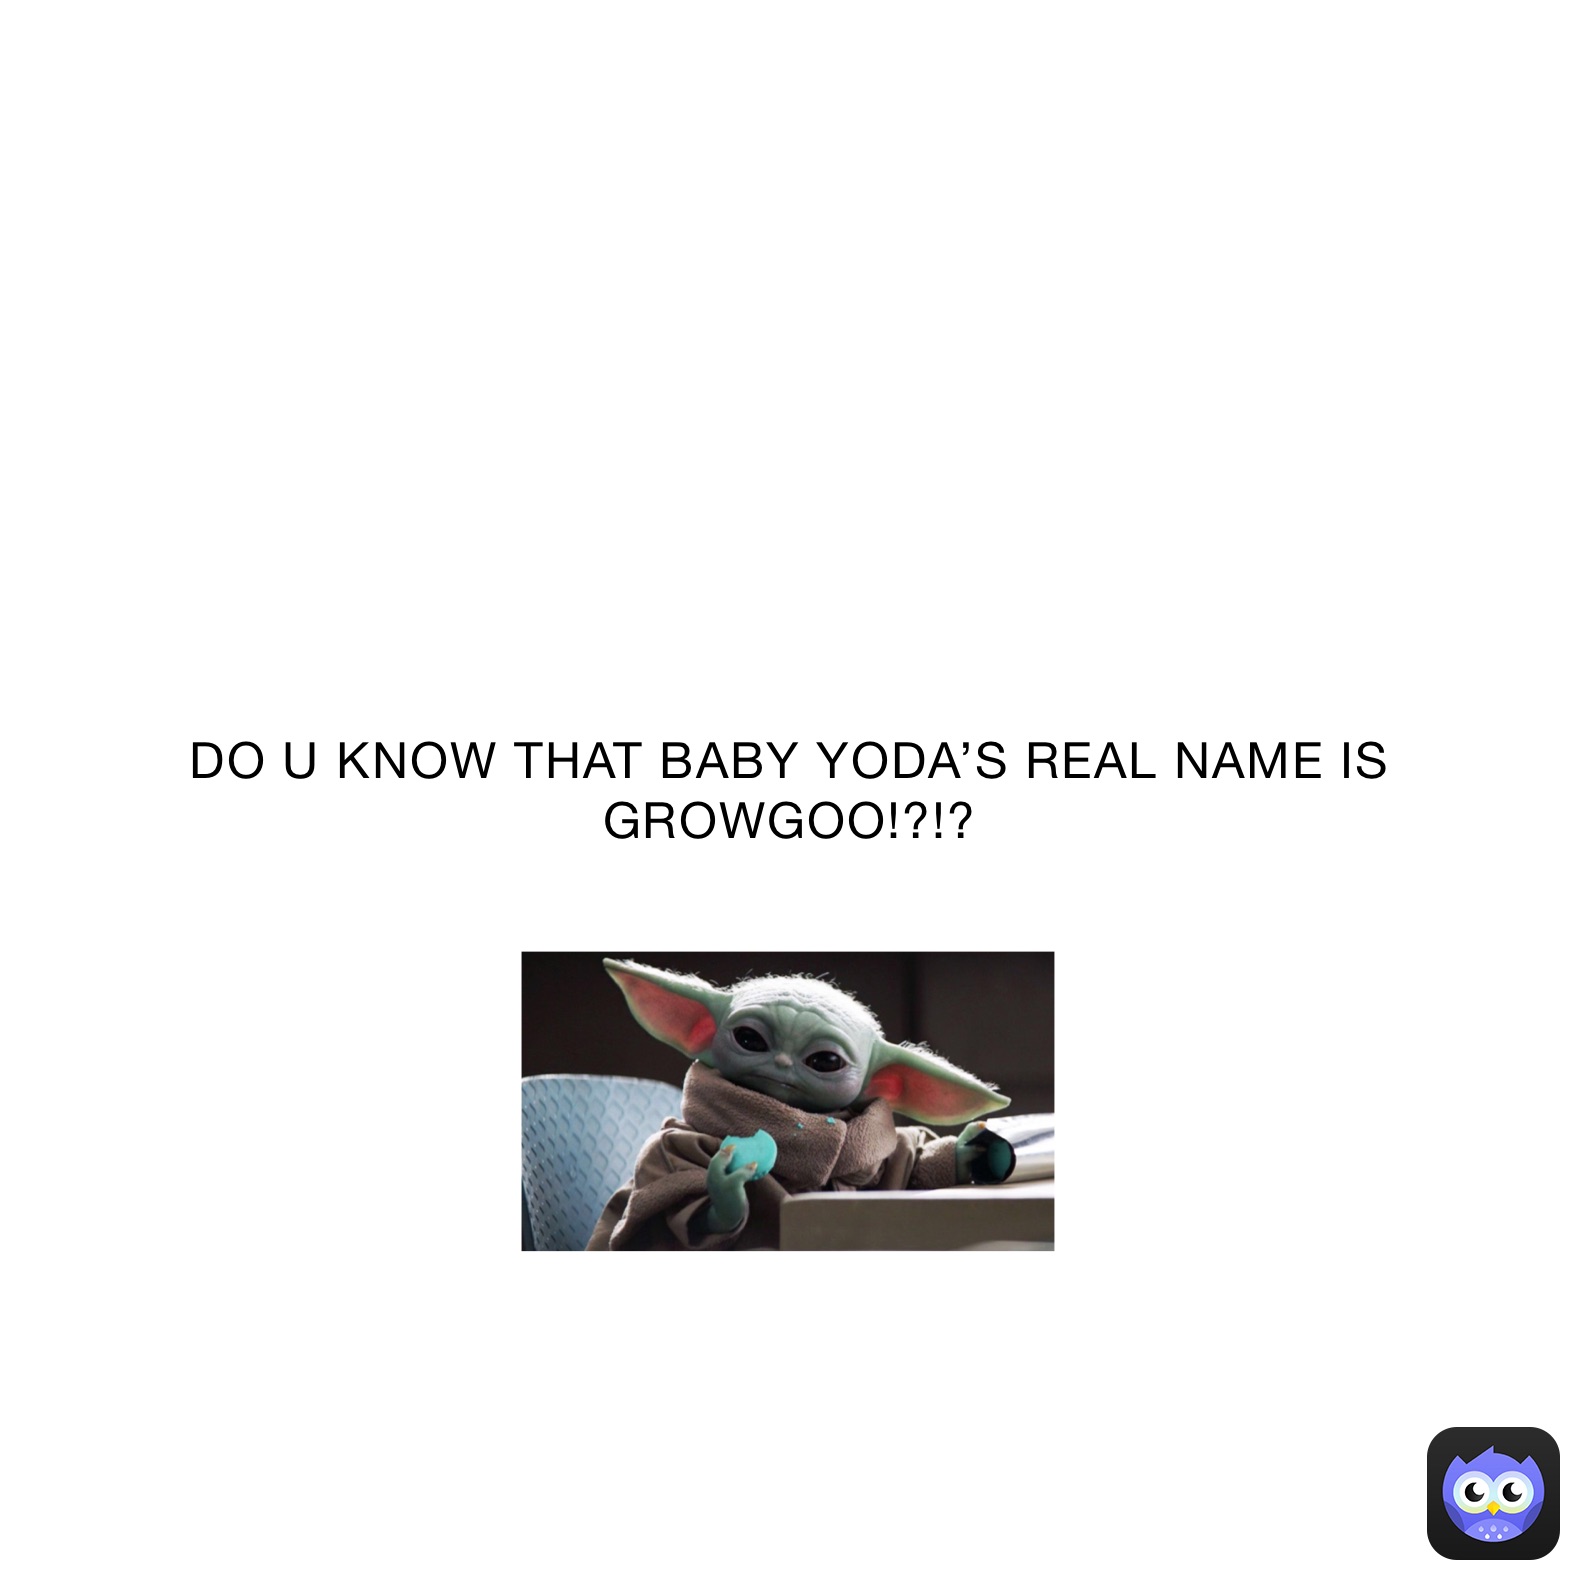 DO U KNOW THAT BABY YODA’S REAL NAME IS GROWGOO!?!?